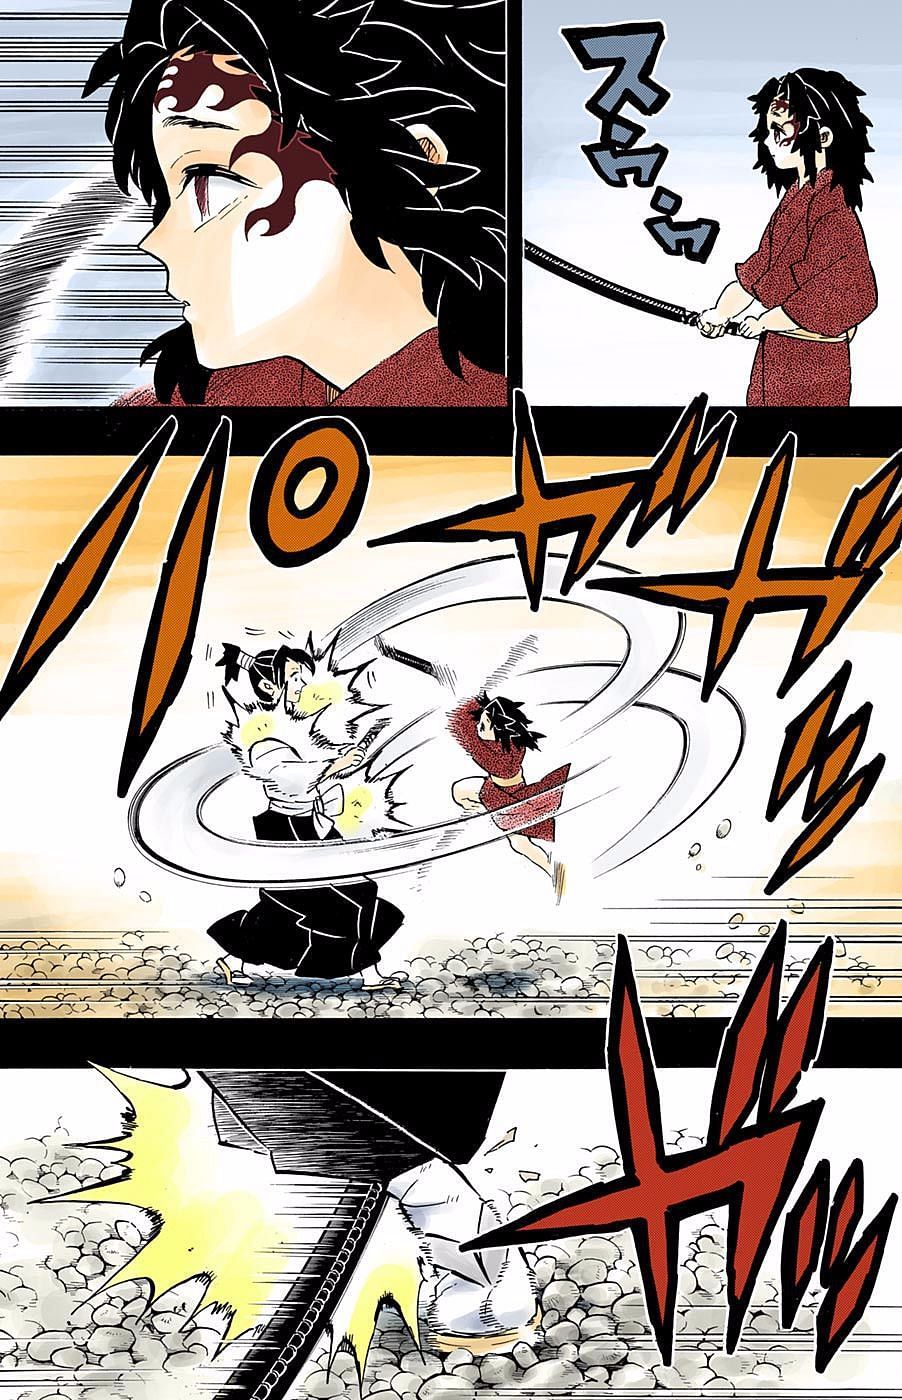 A young Yoriichi handles a sword for the first time, easily beating a trained master. (Image via Shueisha Shonen Jump)